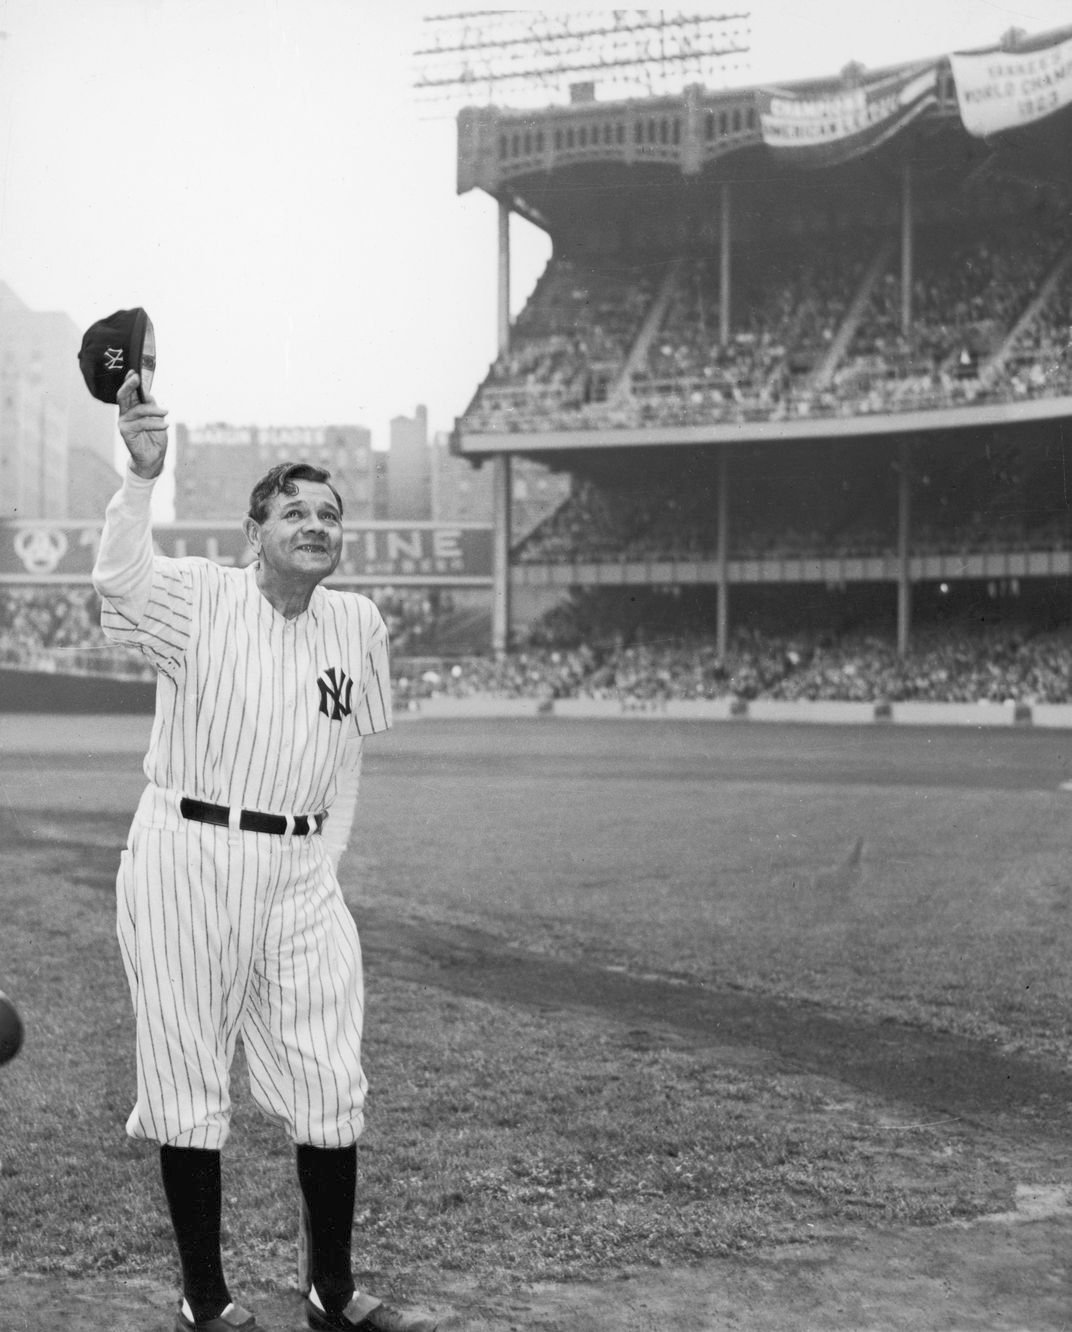 Babe Ruth's final appearance in a Yankee's uniform, 6/16/1948